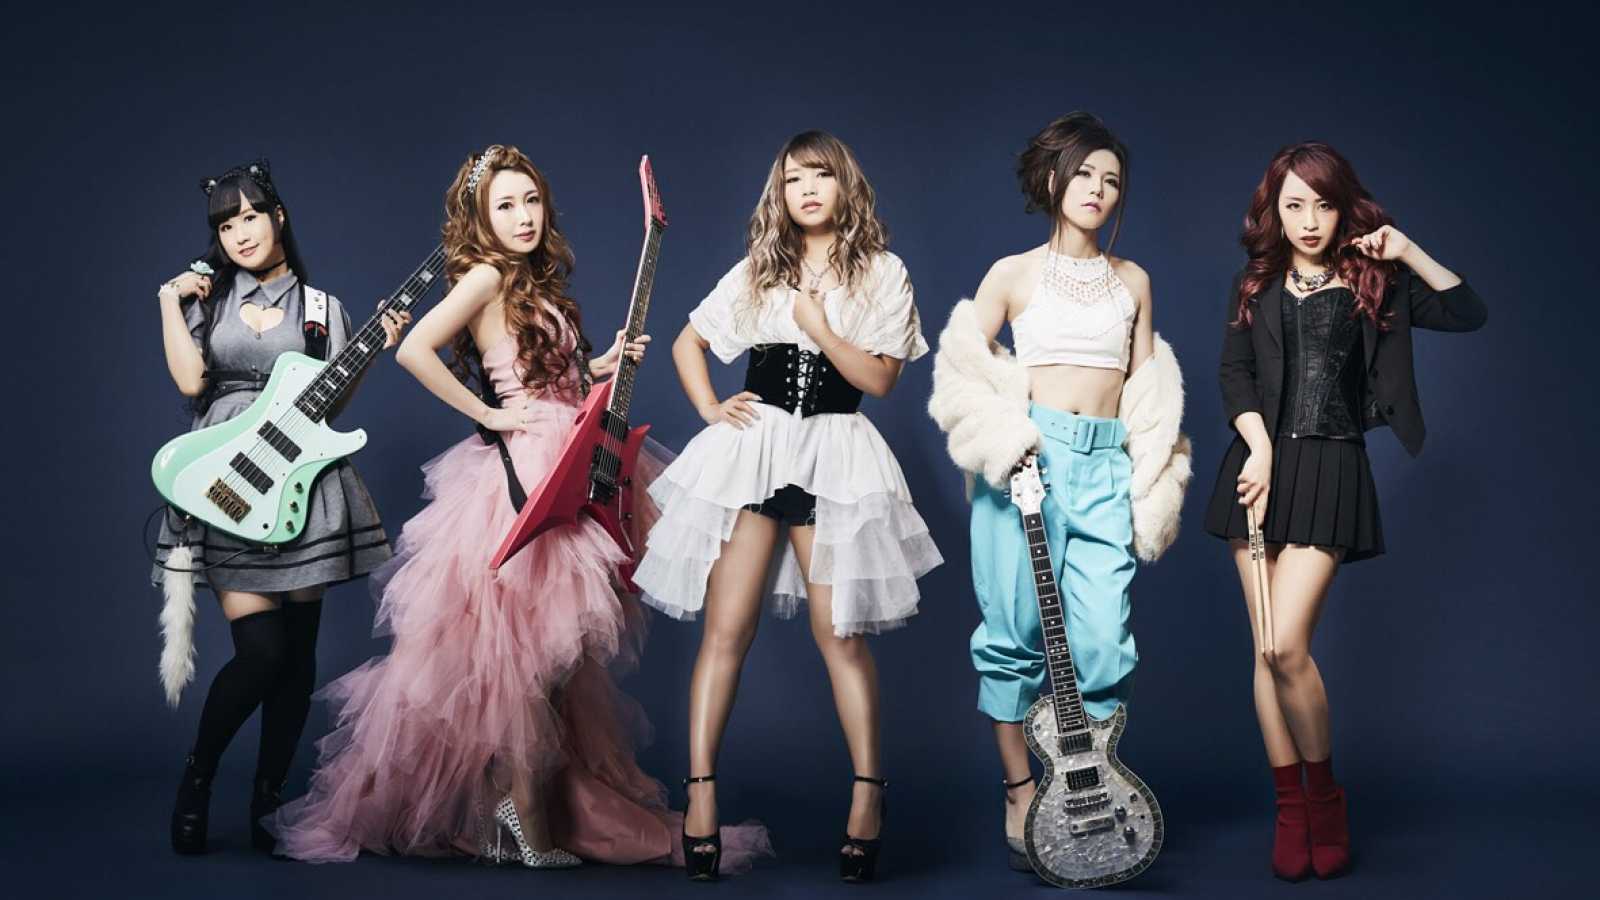 New Self-Cover Album from Aldious © VAA. All rights reserved.